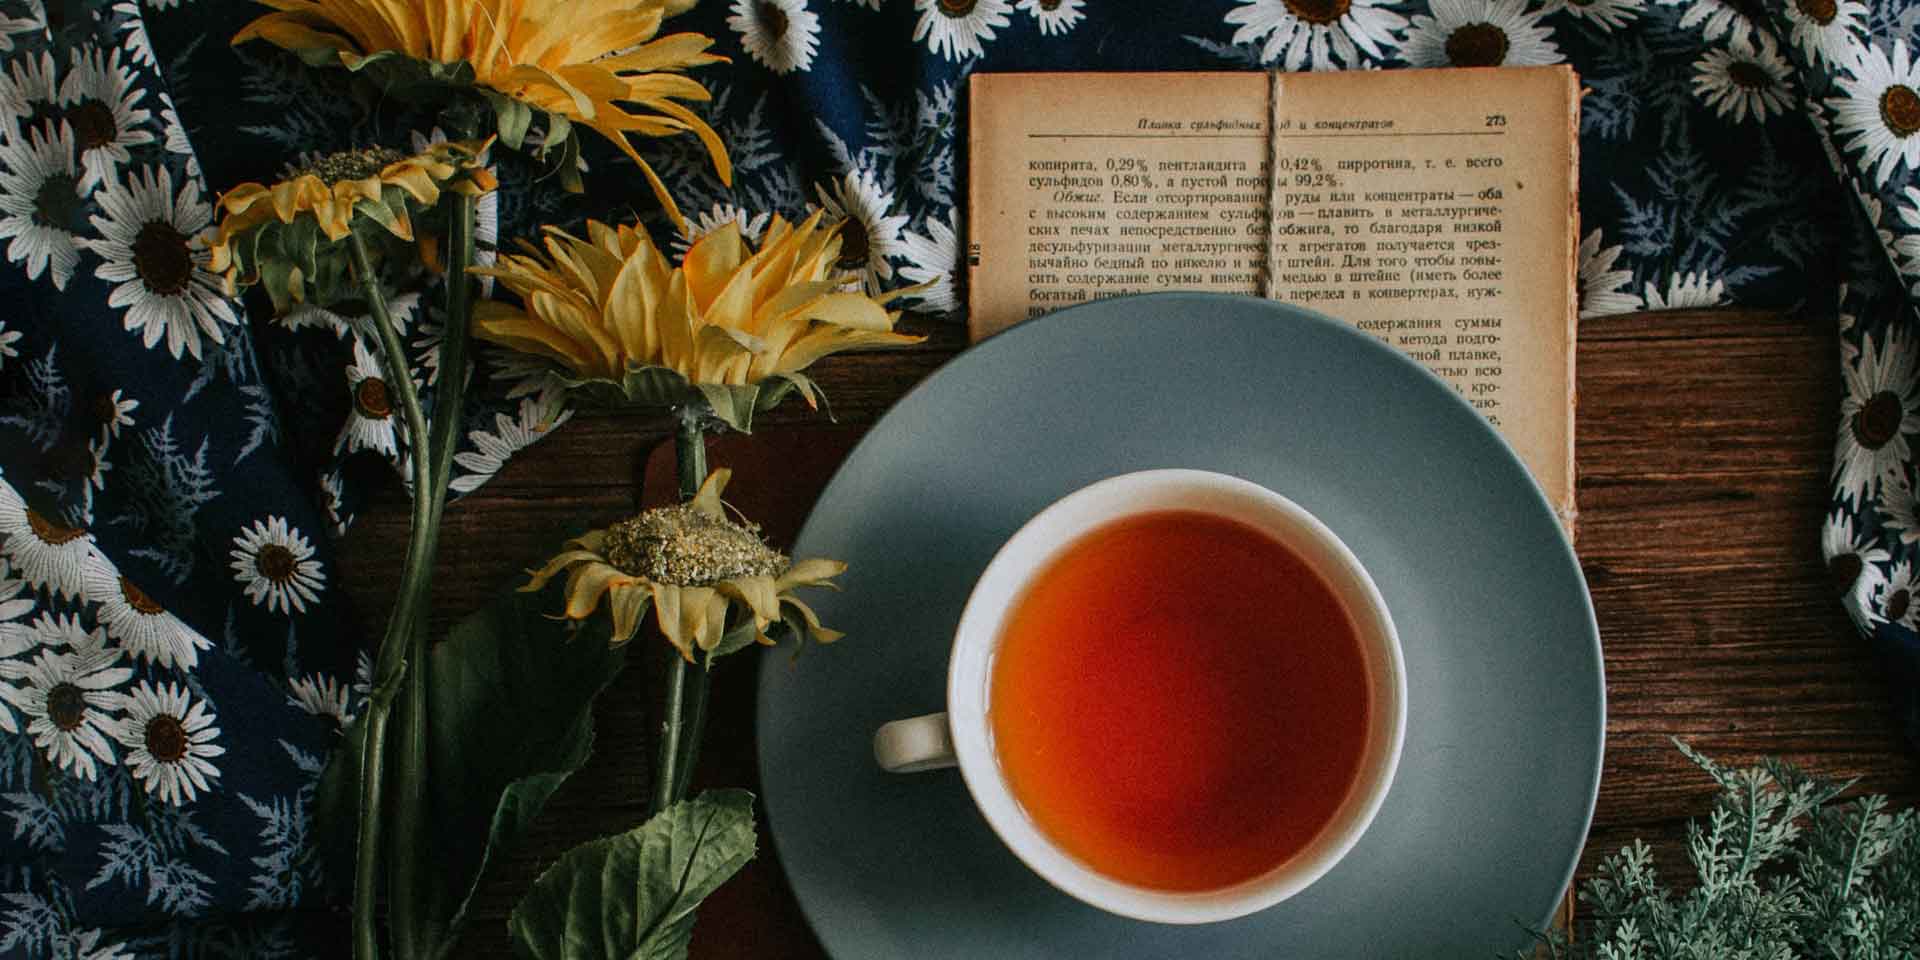 A tranquil tea time: a cup of warm tea nestled amidst a floral backdrop, accompanied by a metaphysical book with sunflowers adding a vibrant touch of nature.